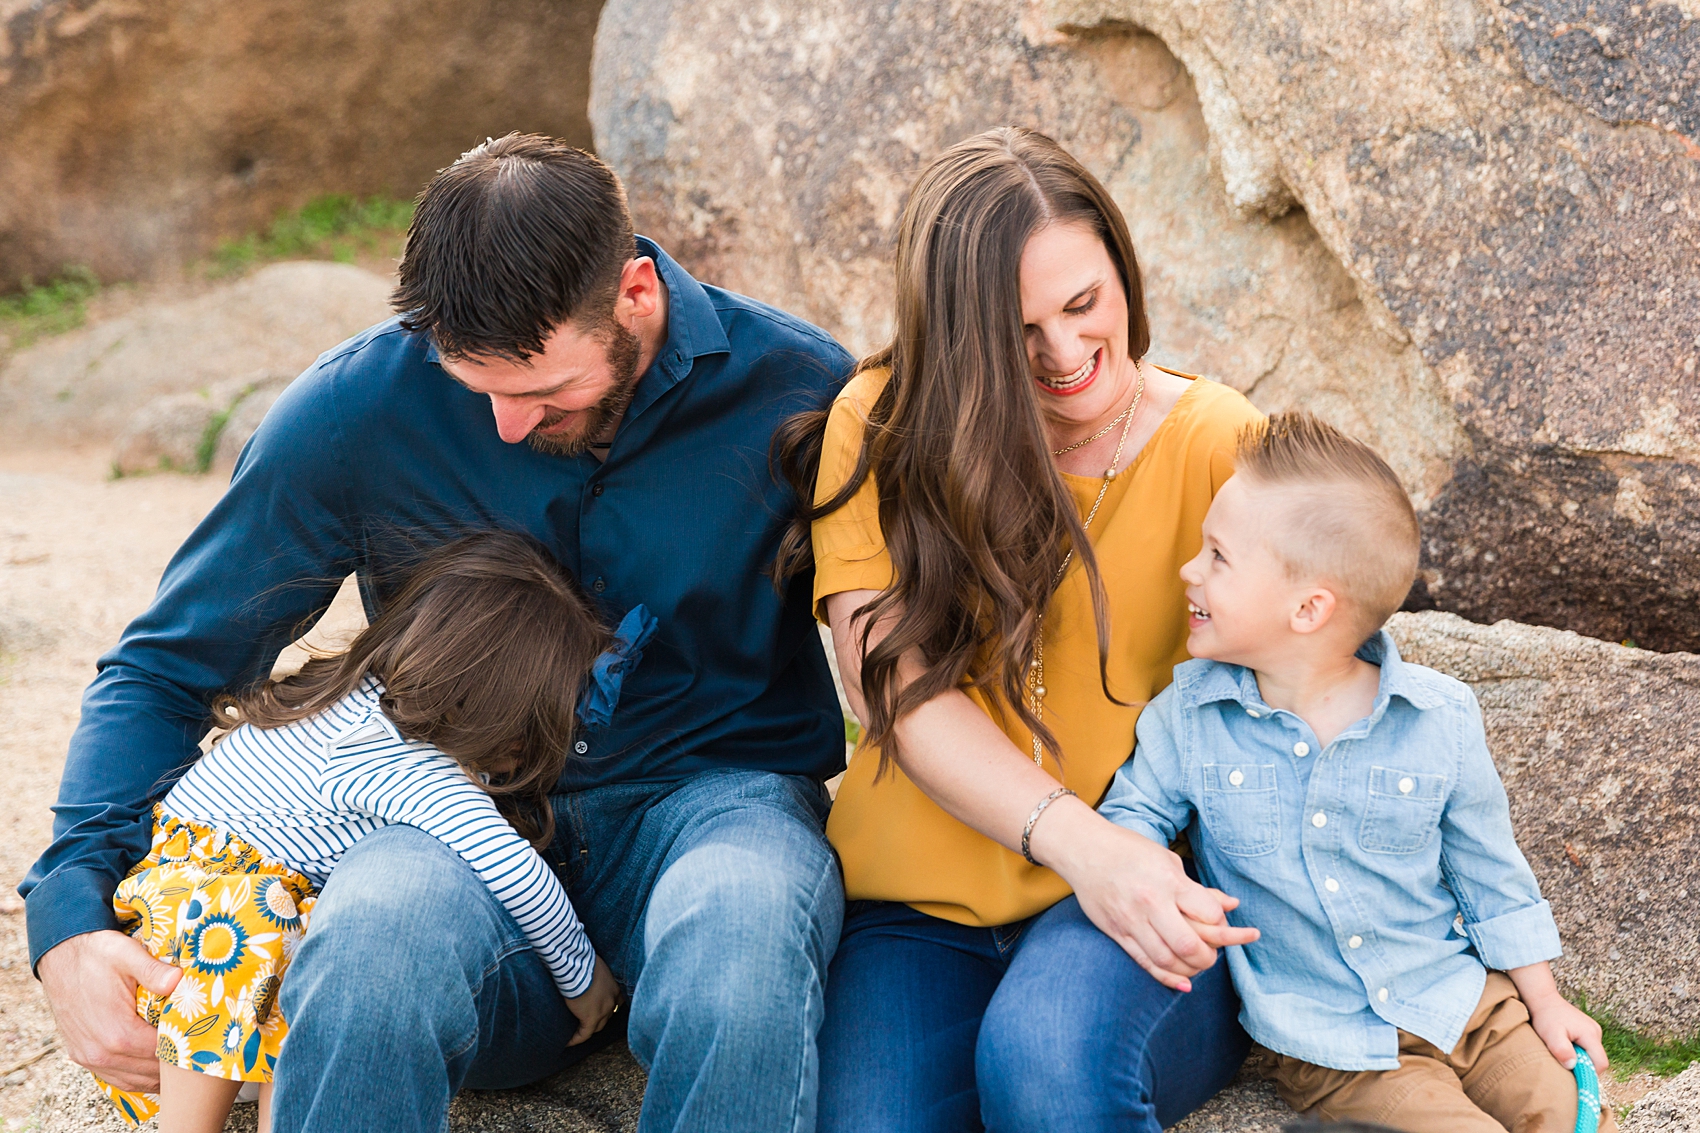 Leah Hope Photography | Scottsdale Phoenix Arizona Photographer | Desert Landscape Boulders | Family Pictures | Family Lifestyle Dog Photos | What to Wear | Family Poses